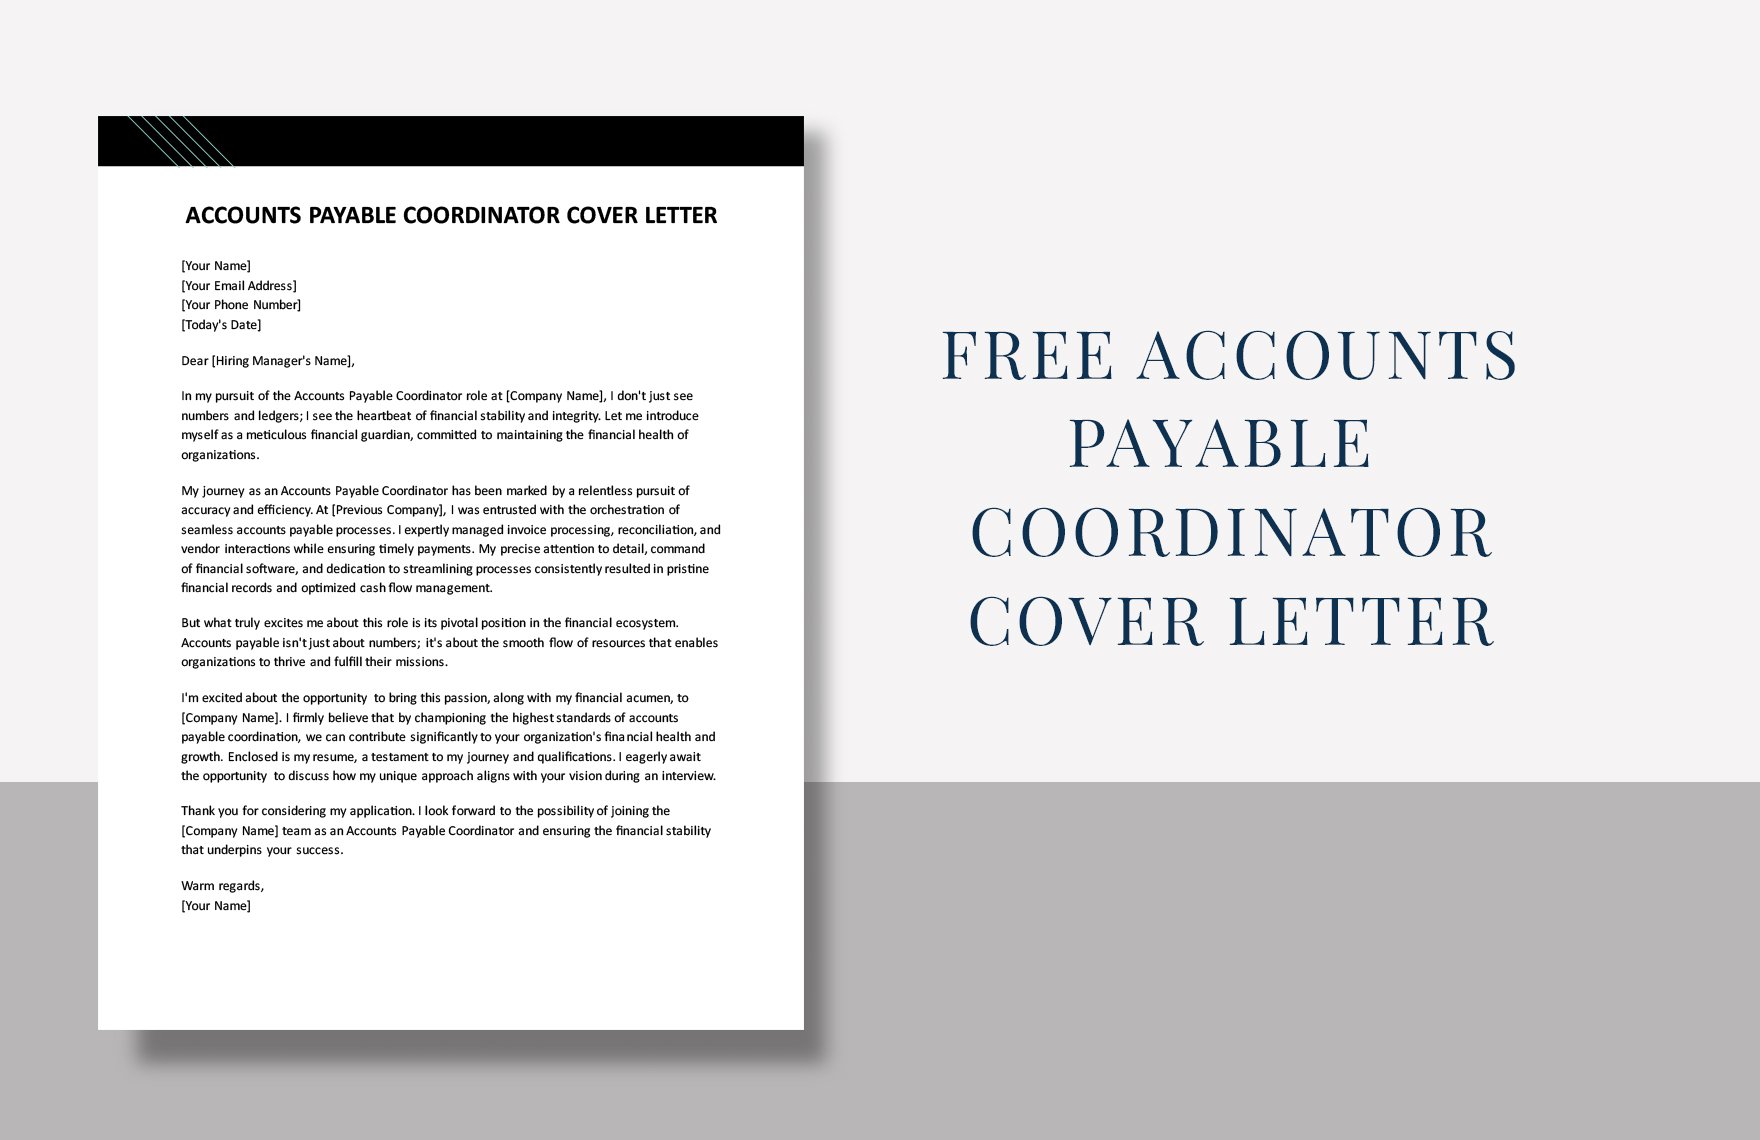 Accounts Payable Coordinator Cover Letter in Word, Google Docs, PDF